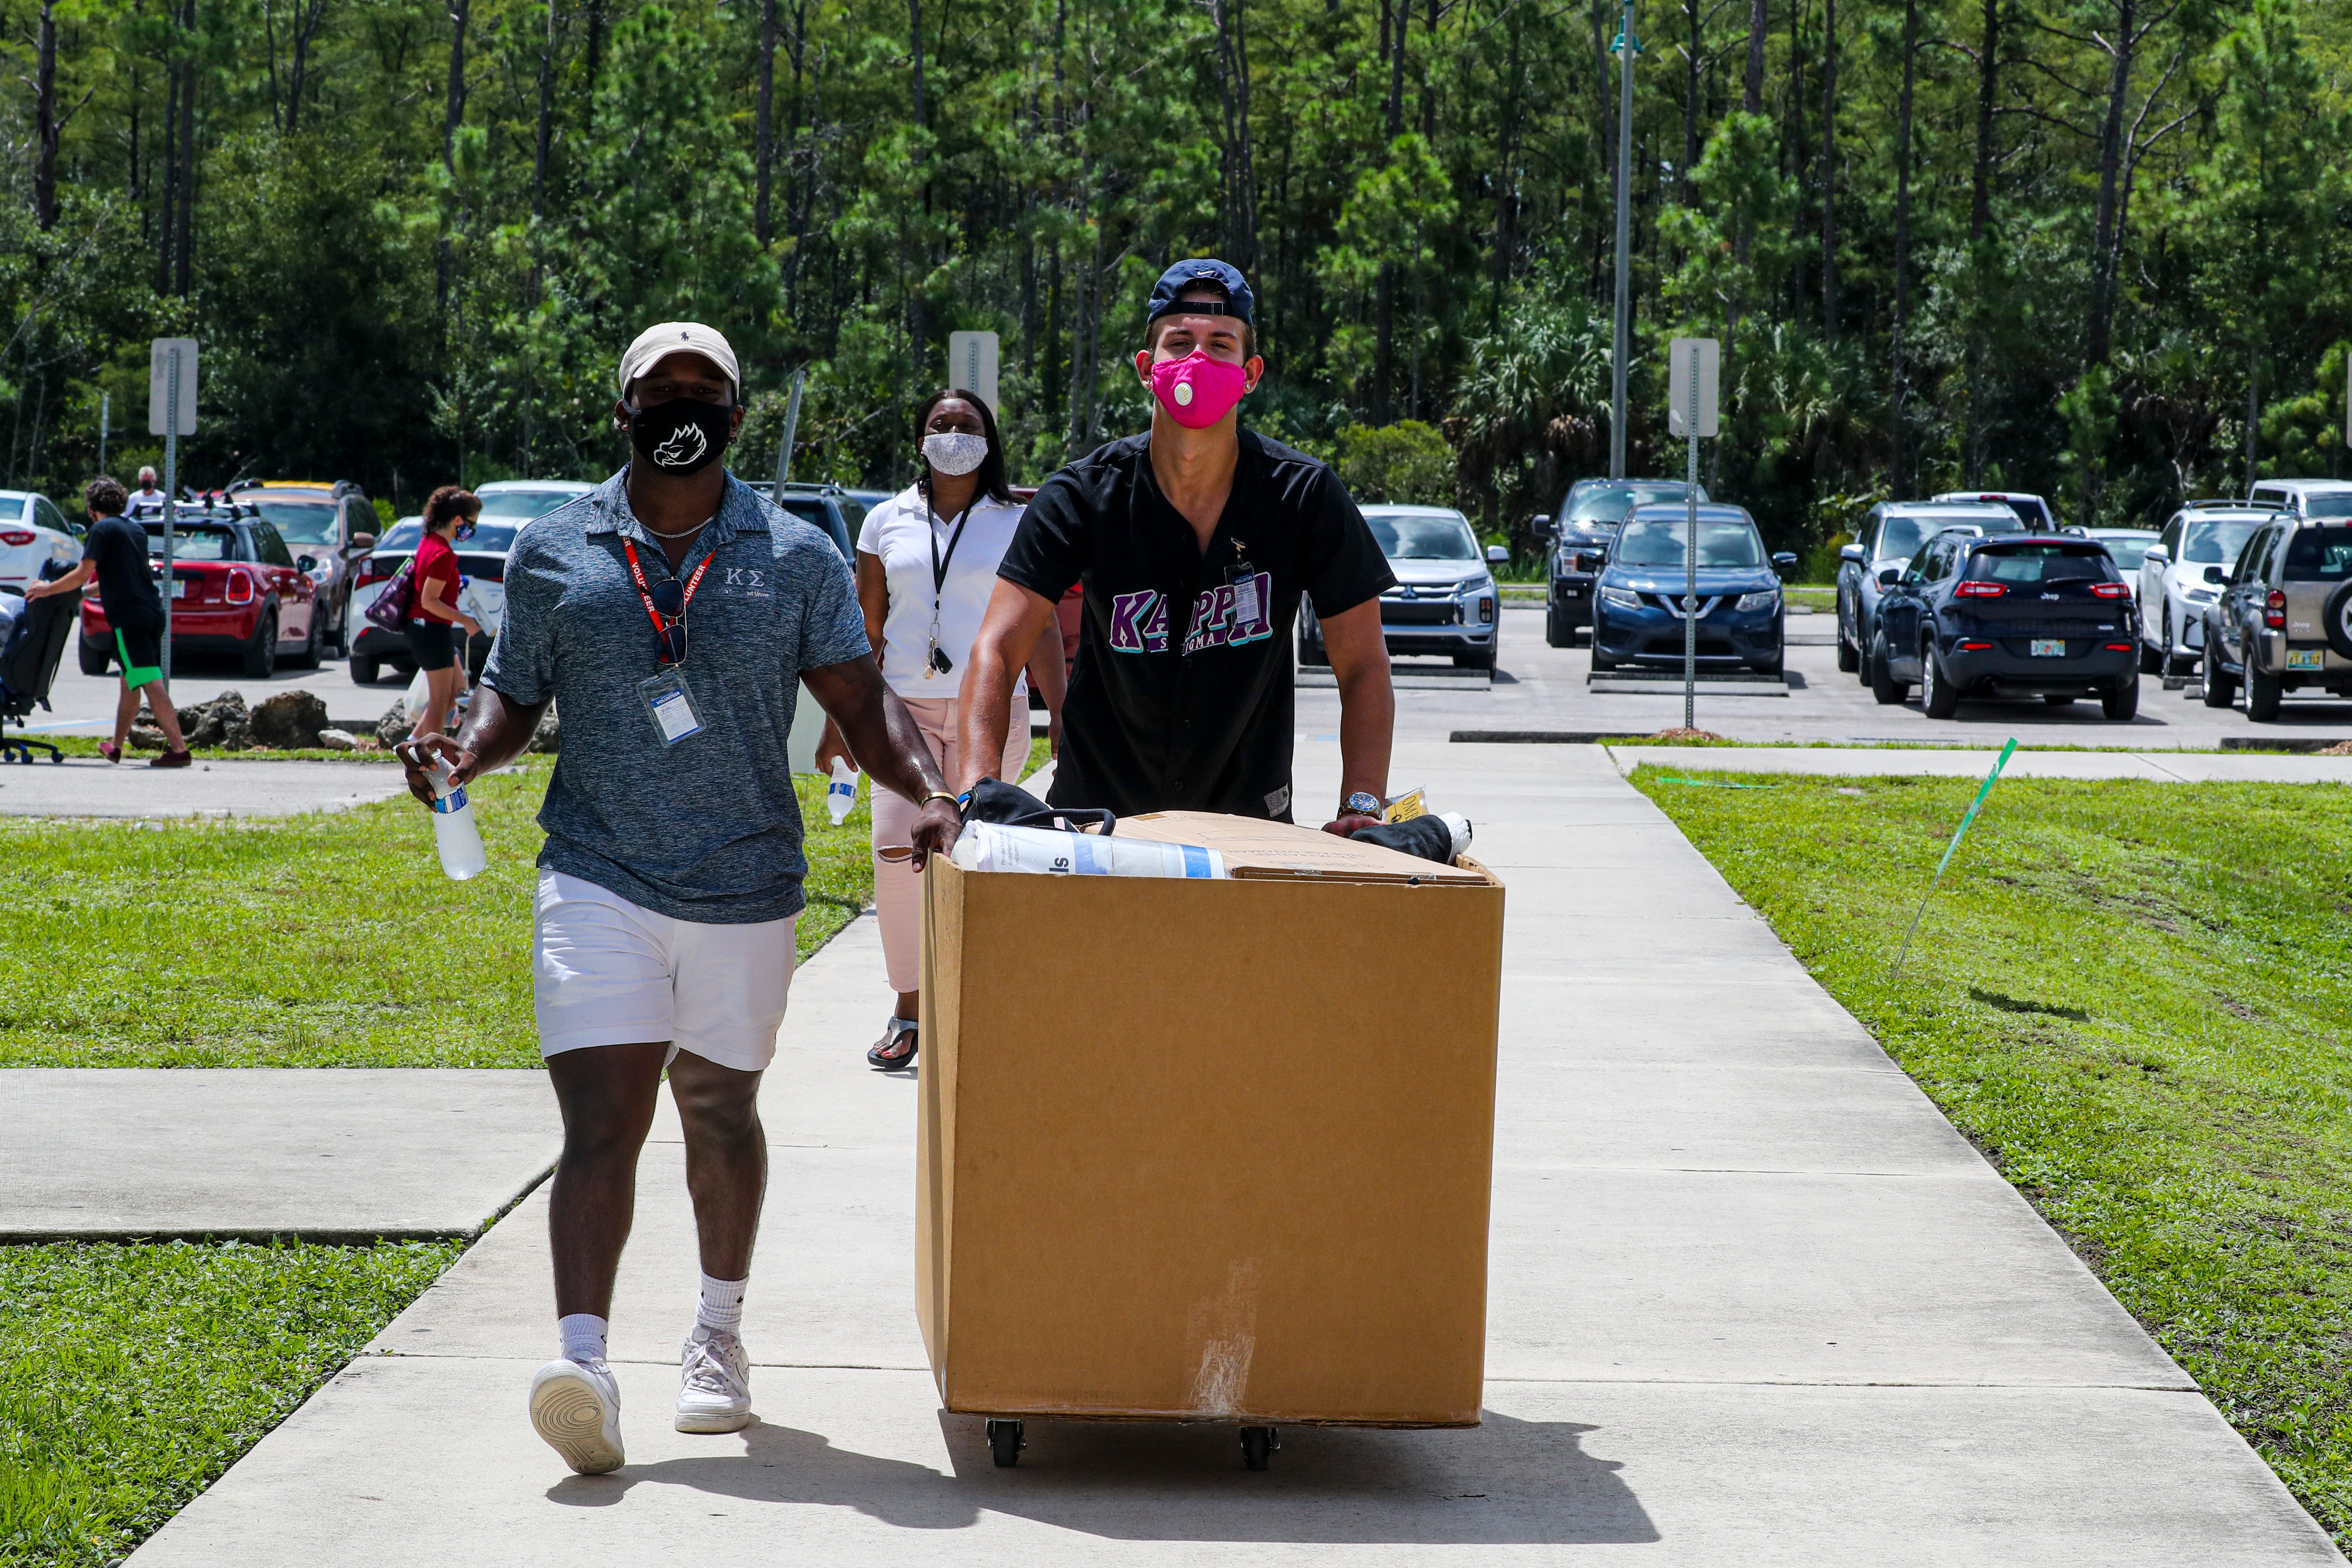 Fall semester at FGCU has begun with highlights on students moving in to campus dorms, the changes being seen on campus safety wise and the budget realities for what's to come.